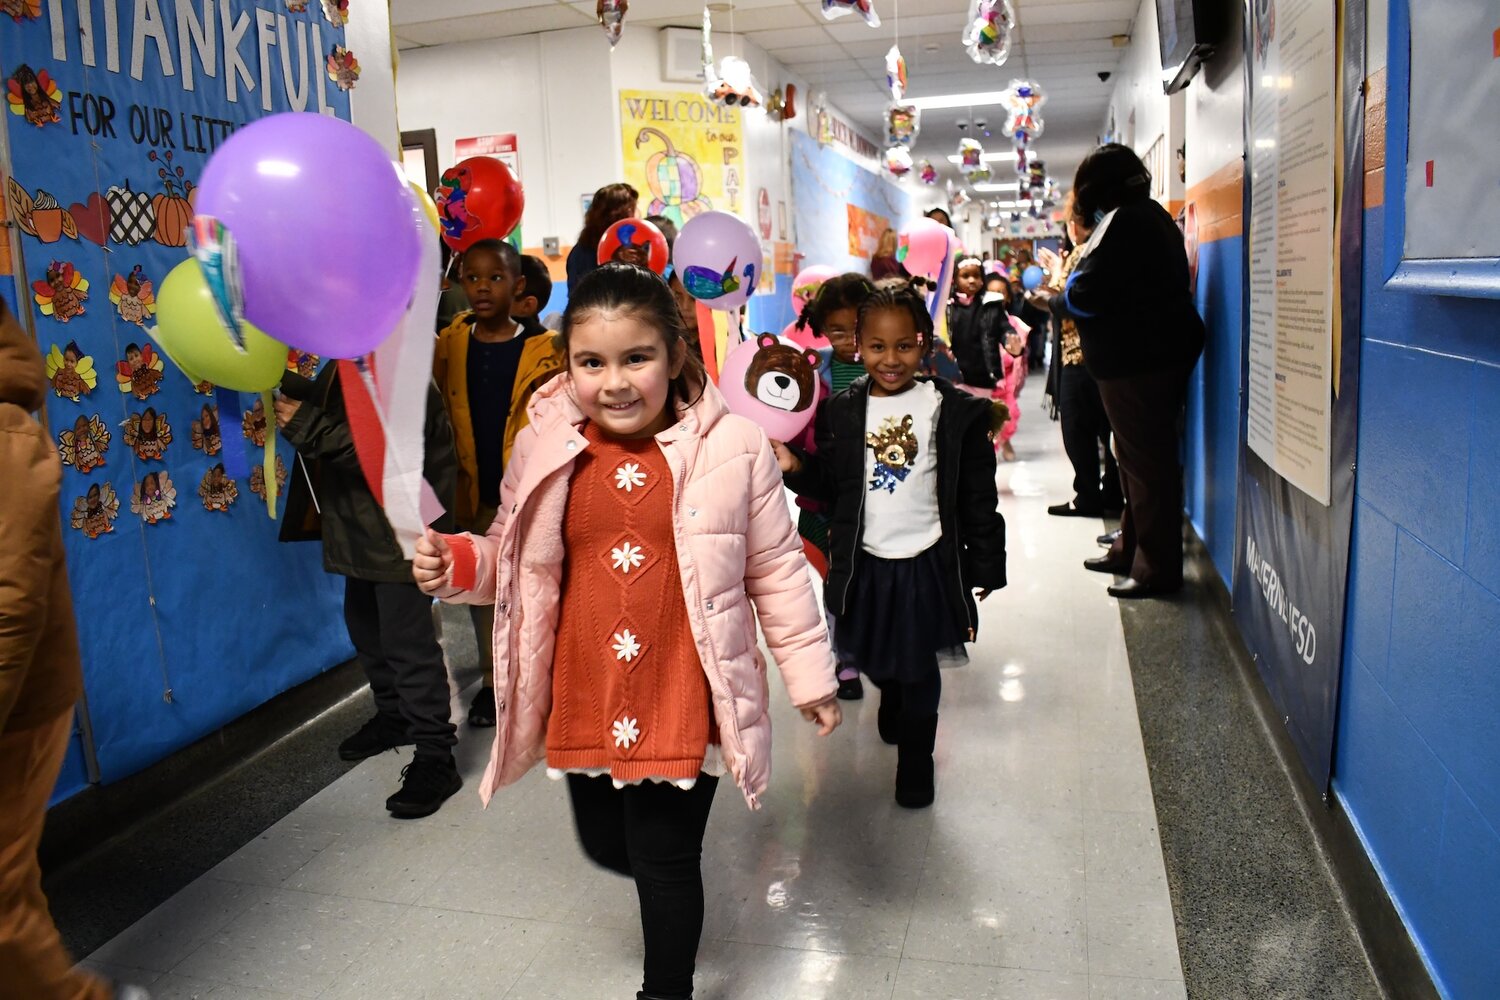 Kindergarten students march, proudly raising colorful balloons, in a celebration of the spirit of Thanksgiving.